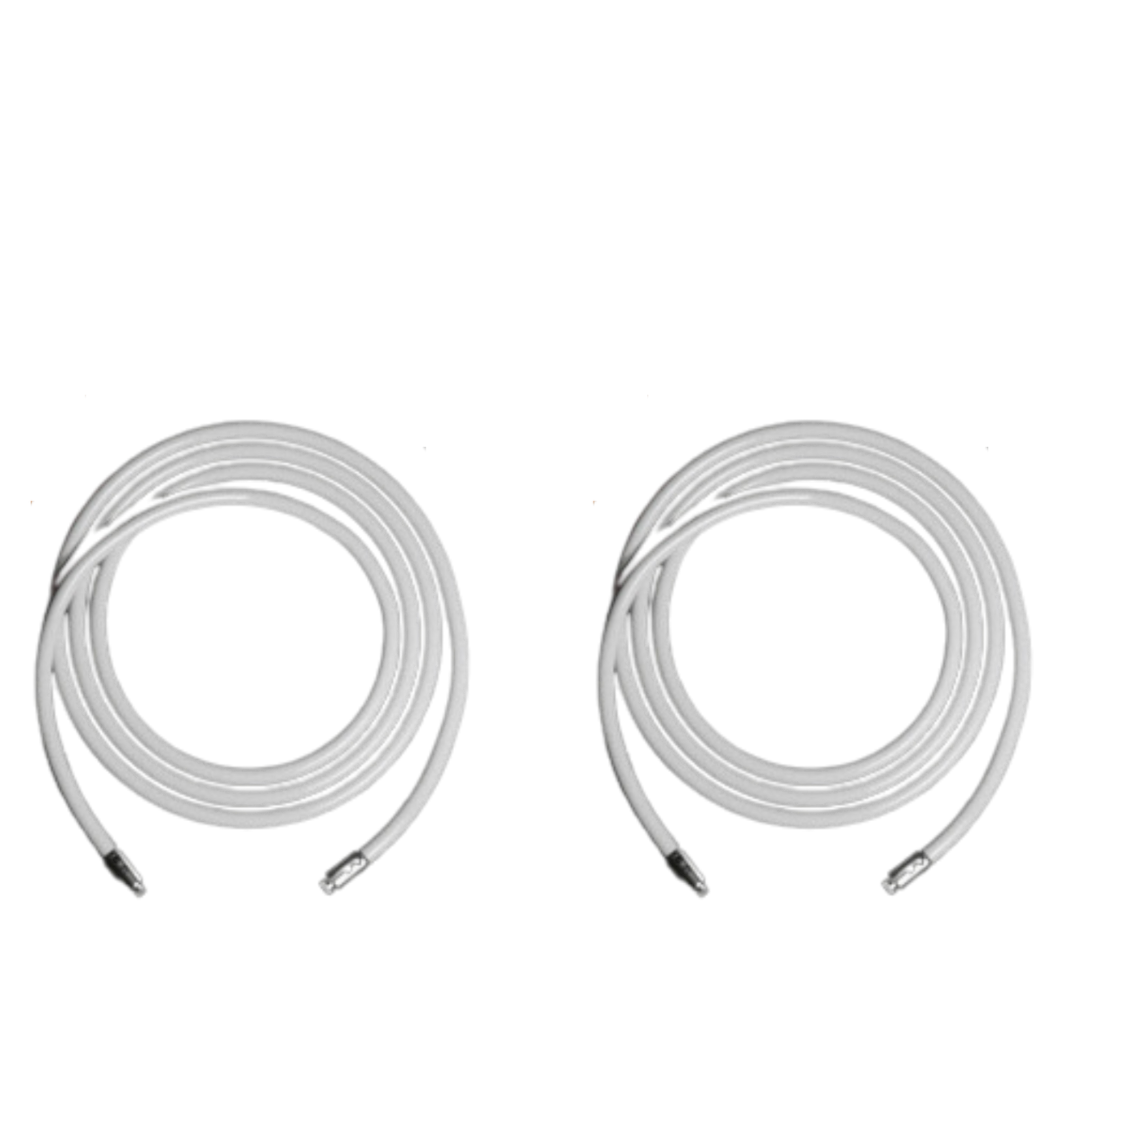 GND Skipping Rope Combo